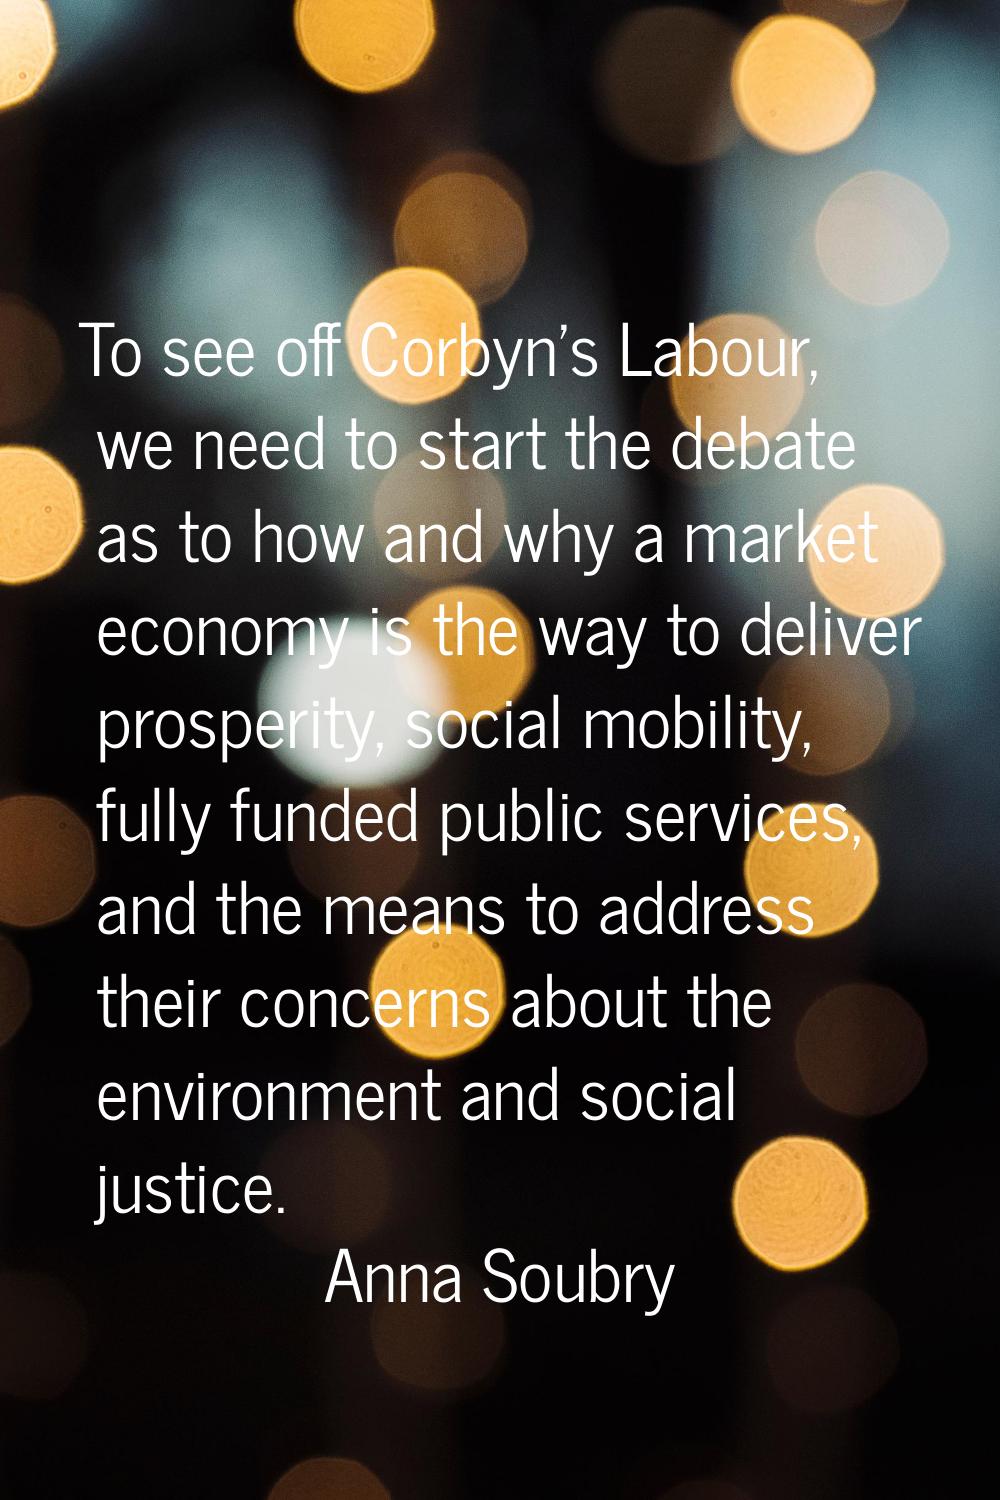 To see off Corbyn's Labour, we need to start the debate as to how and why a market economy is the w